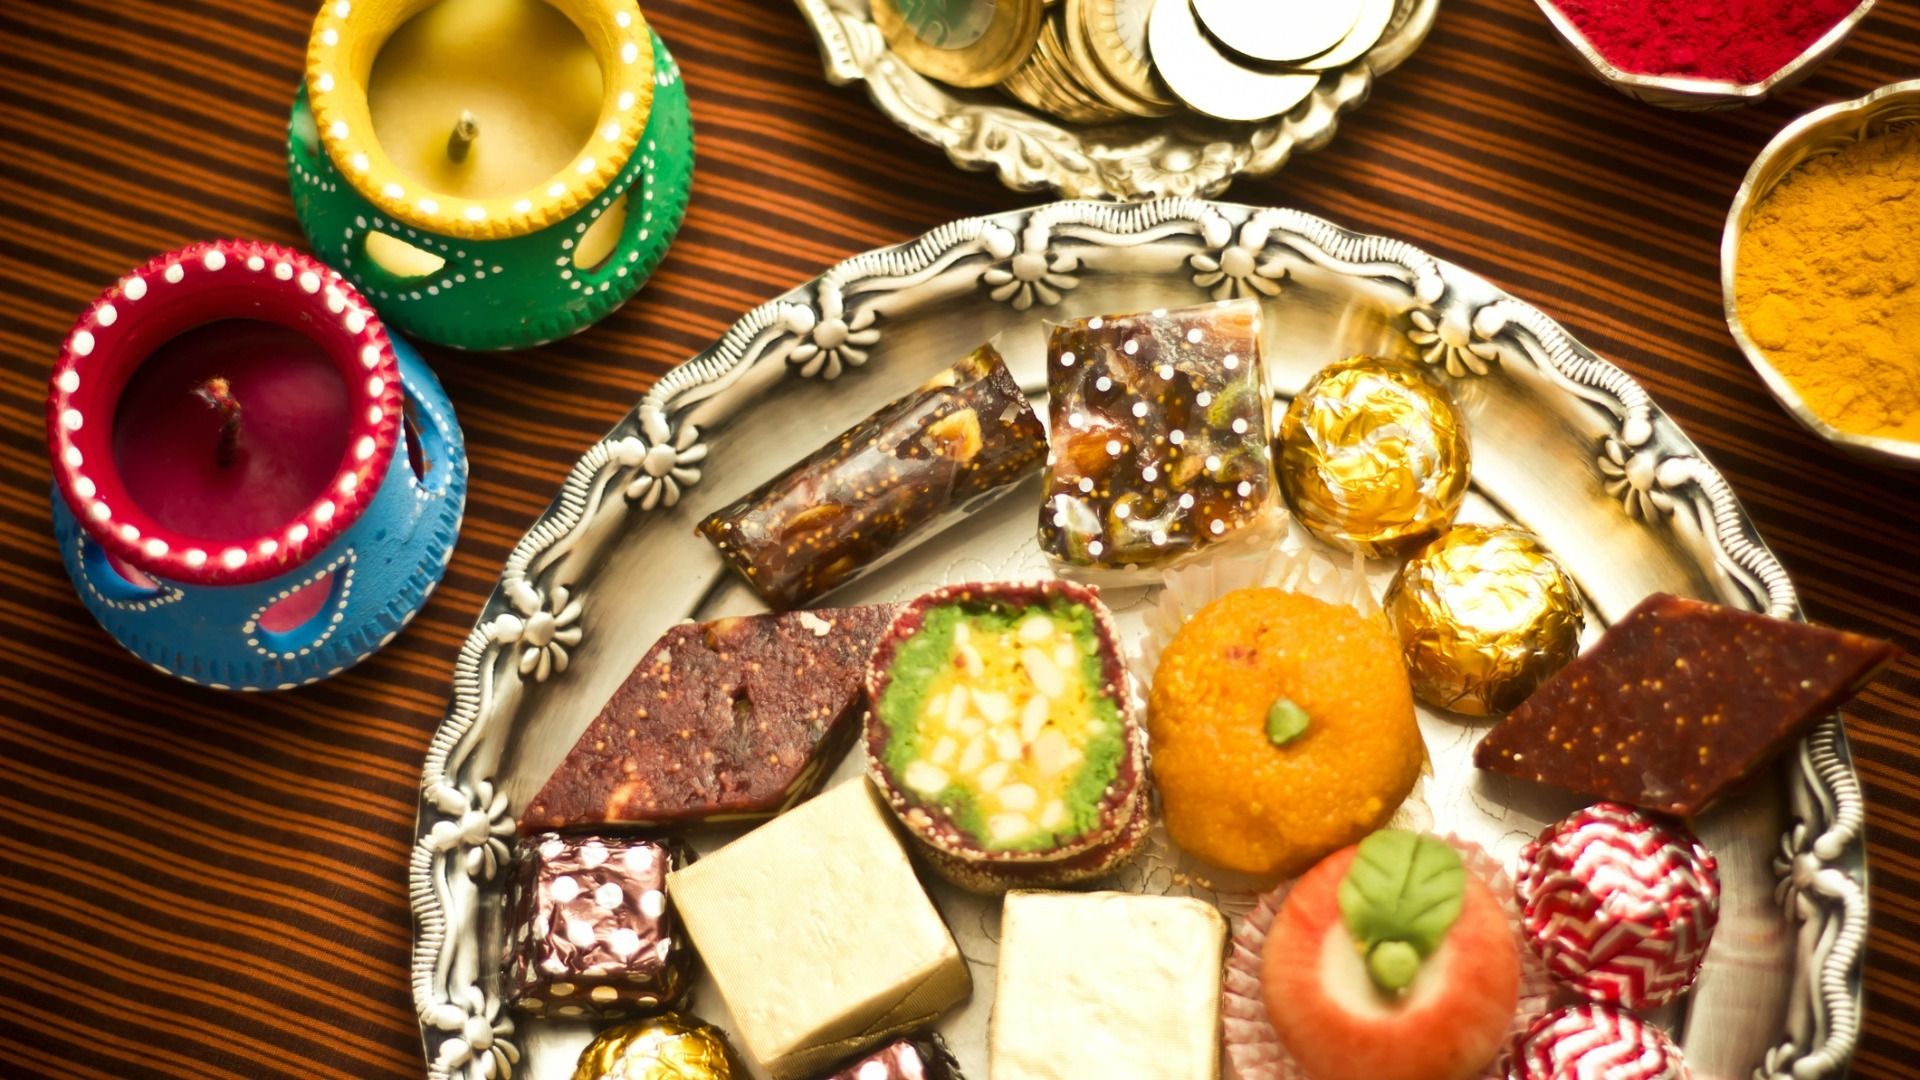 What to eat for Diwali, the Indian festival of lights